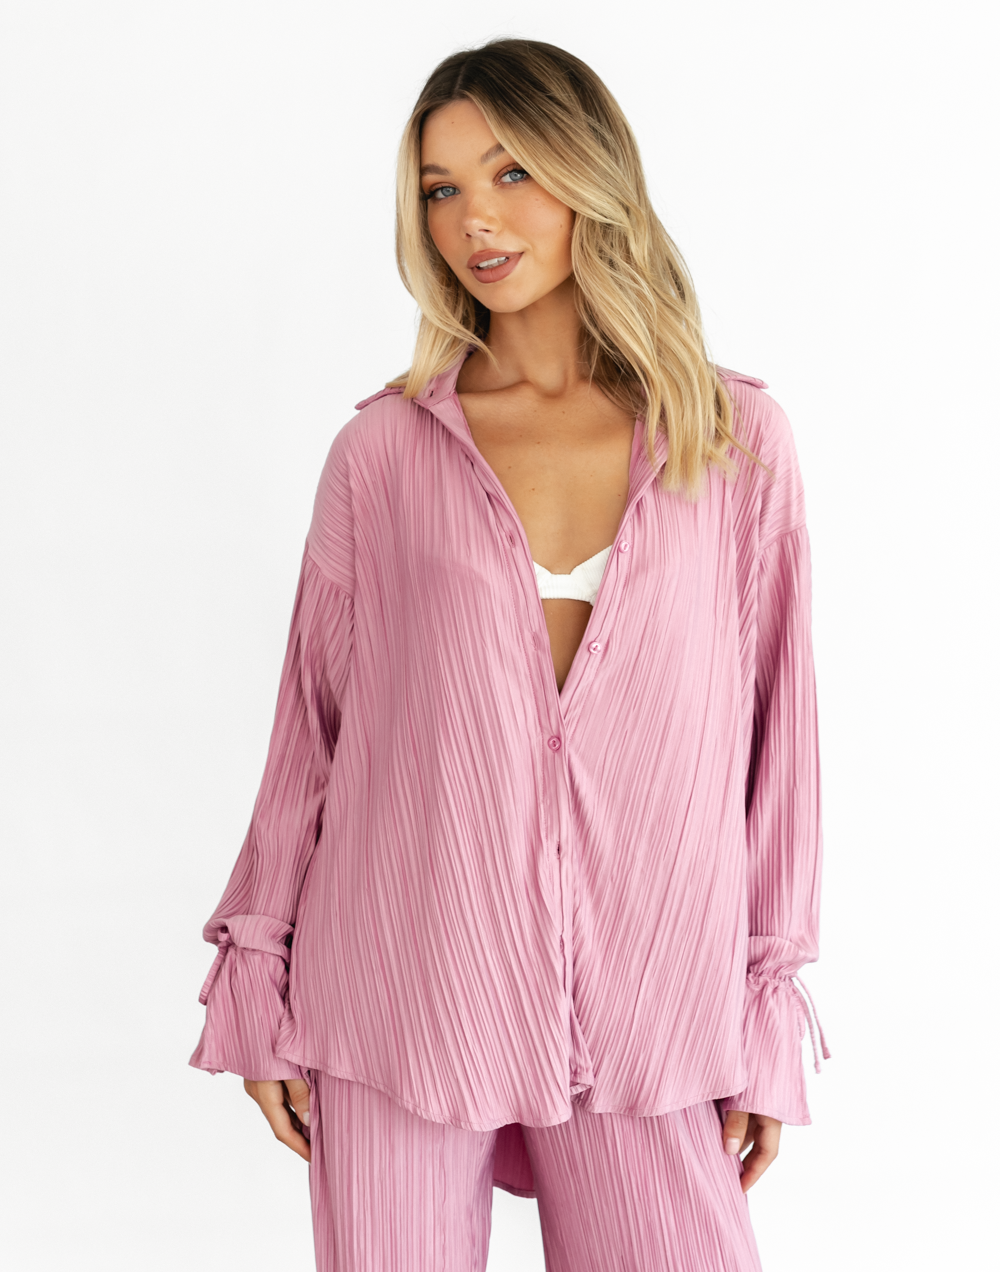 Sweet Serenity Shirt (Dusty Pink) - Pink Pleated Shirt - Women's Top - Charcoal Clothing